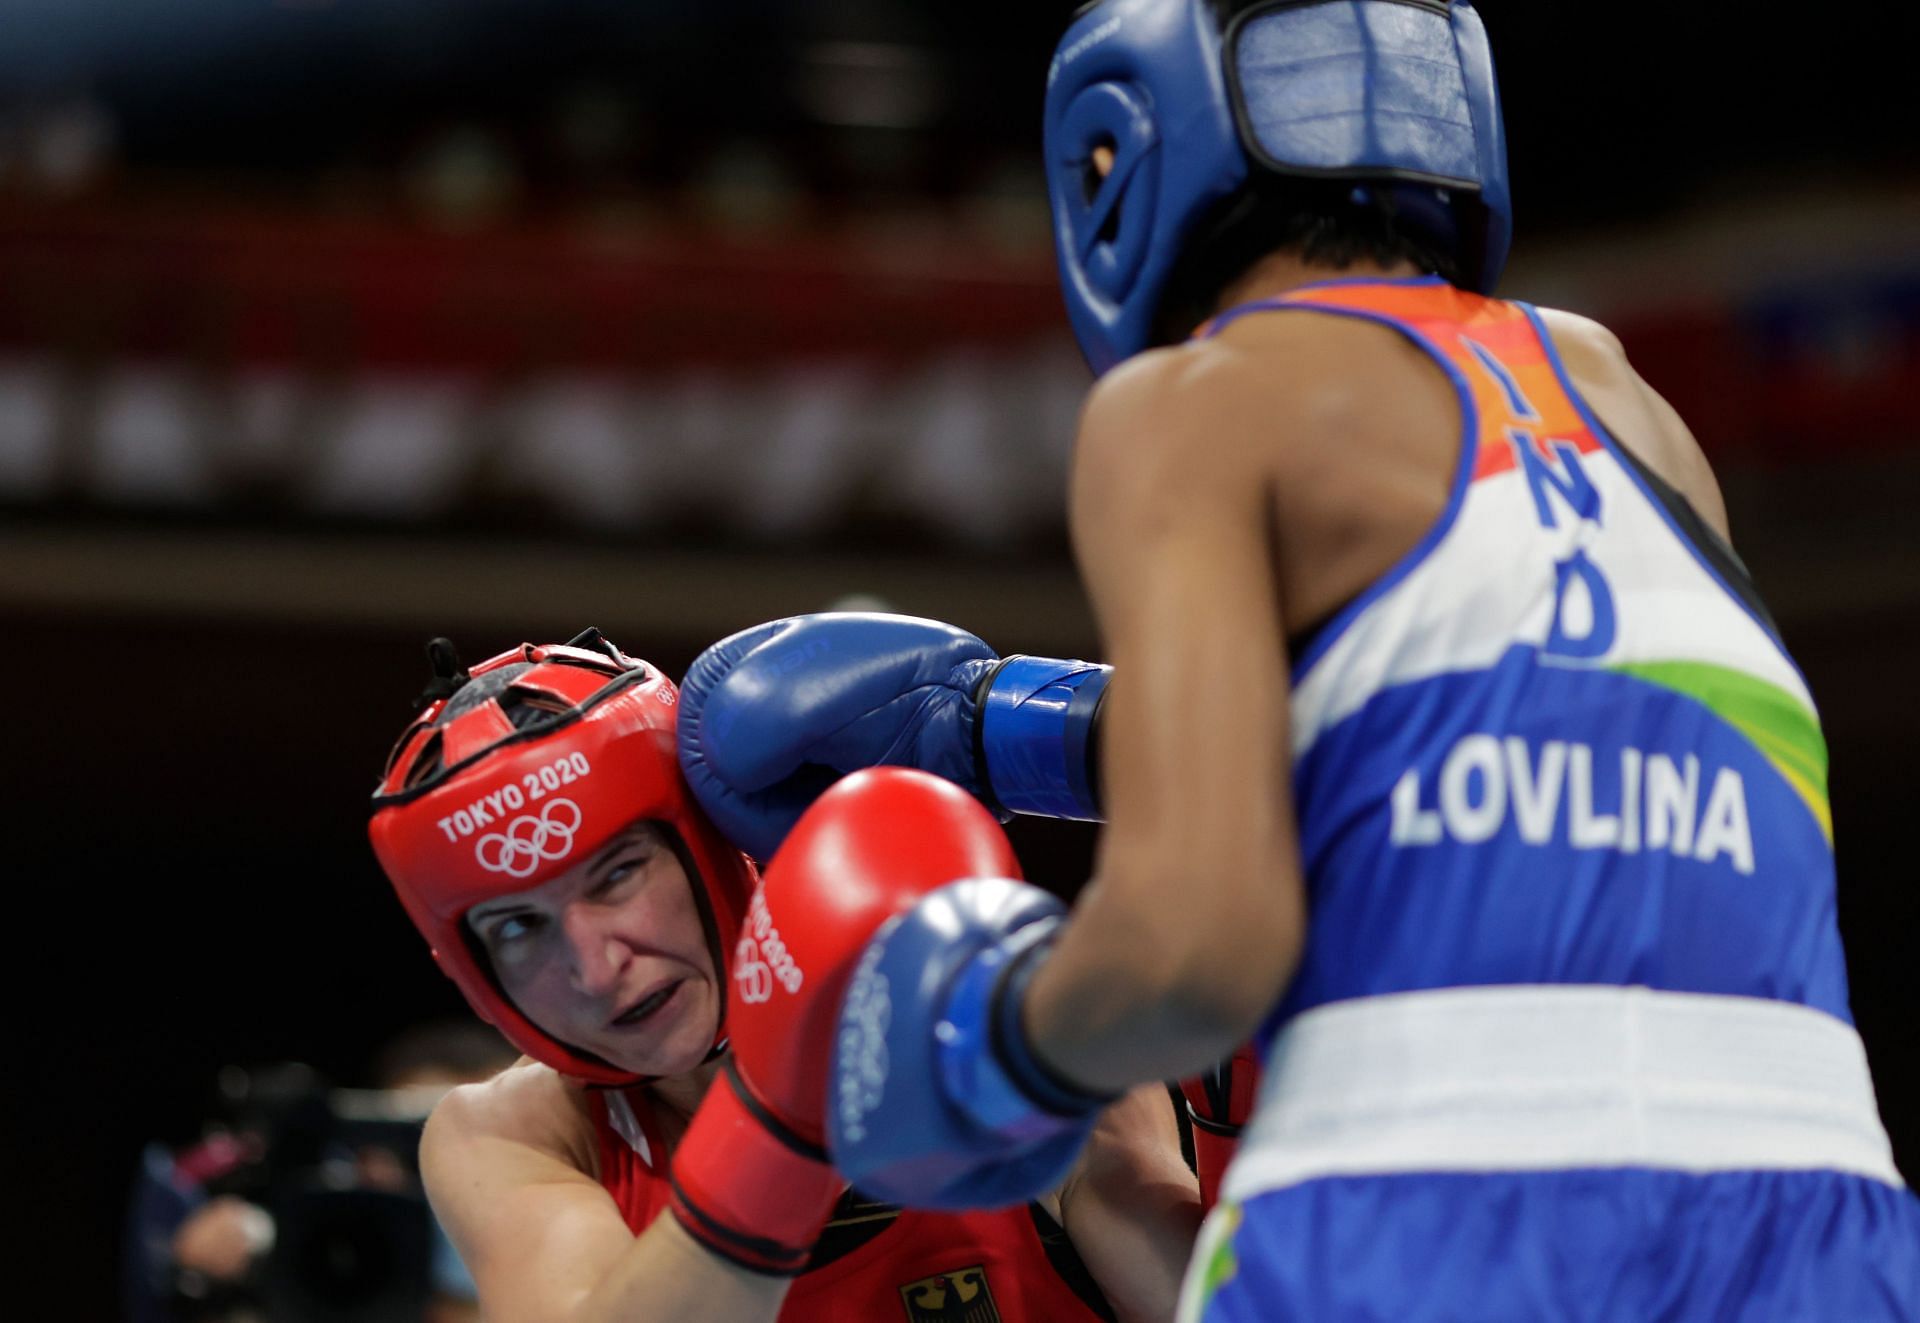 Boxing - Olympics: Day 4